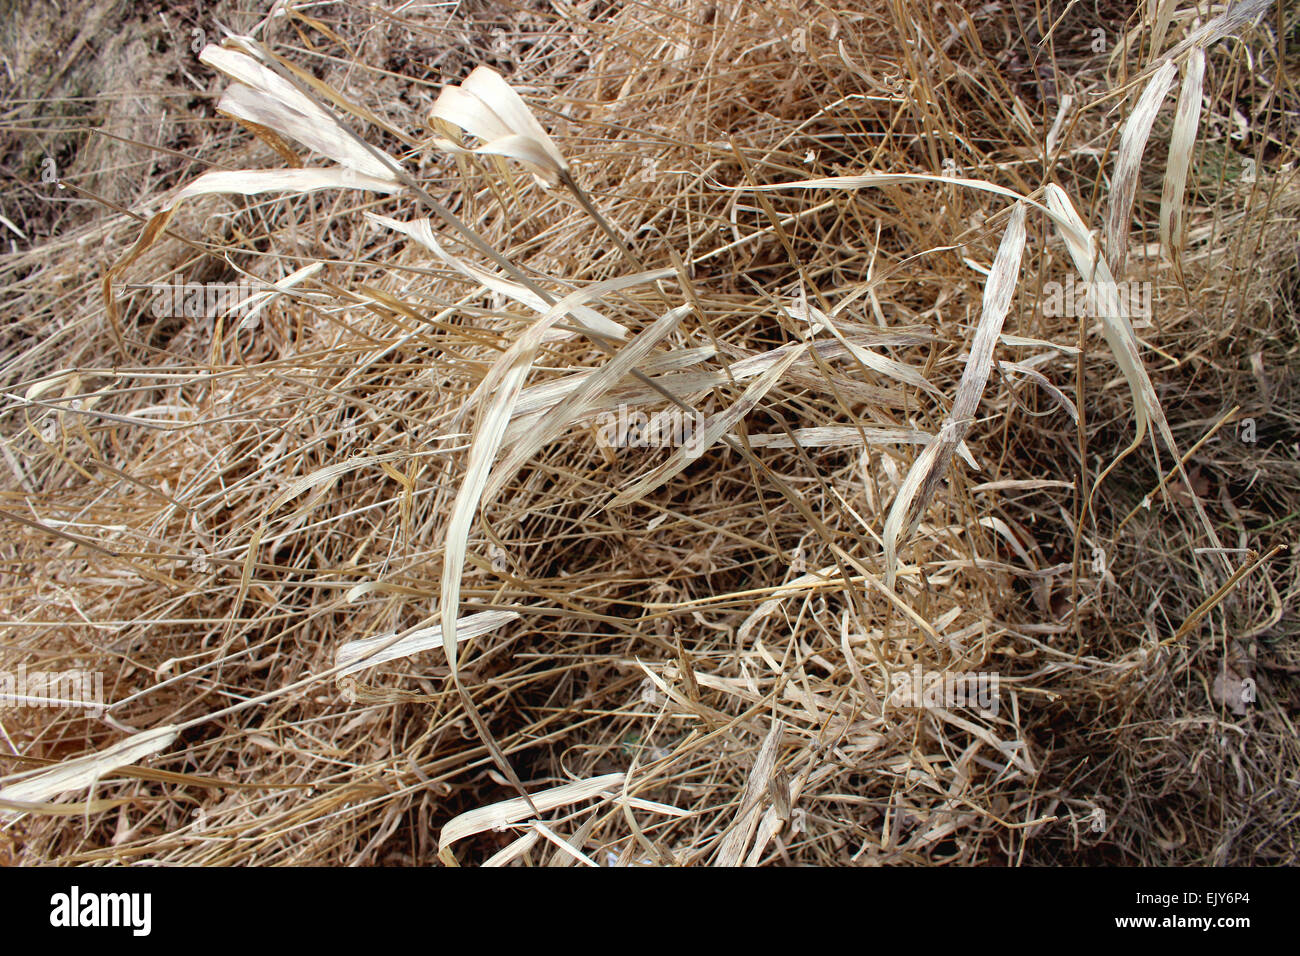 detail of some plants that grow wild and show their resistance to survive the Canadian winter Stock Photo